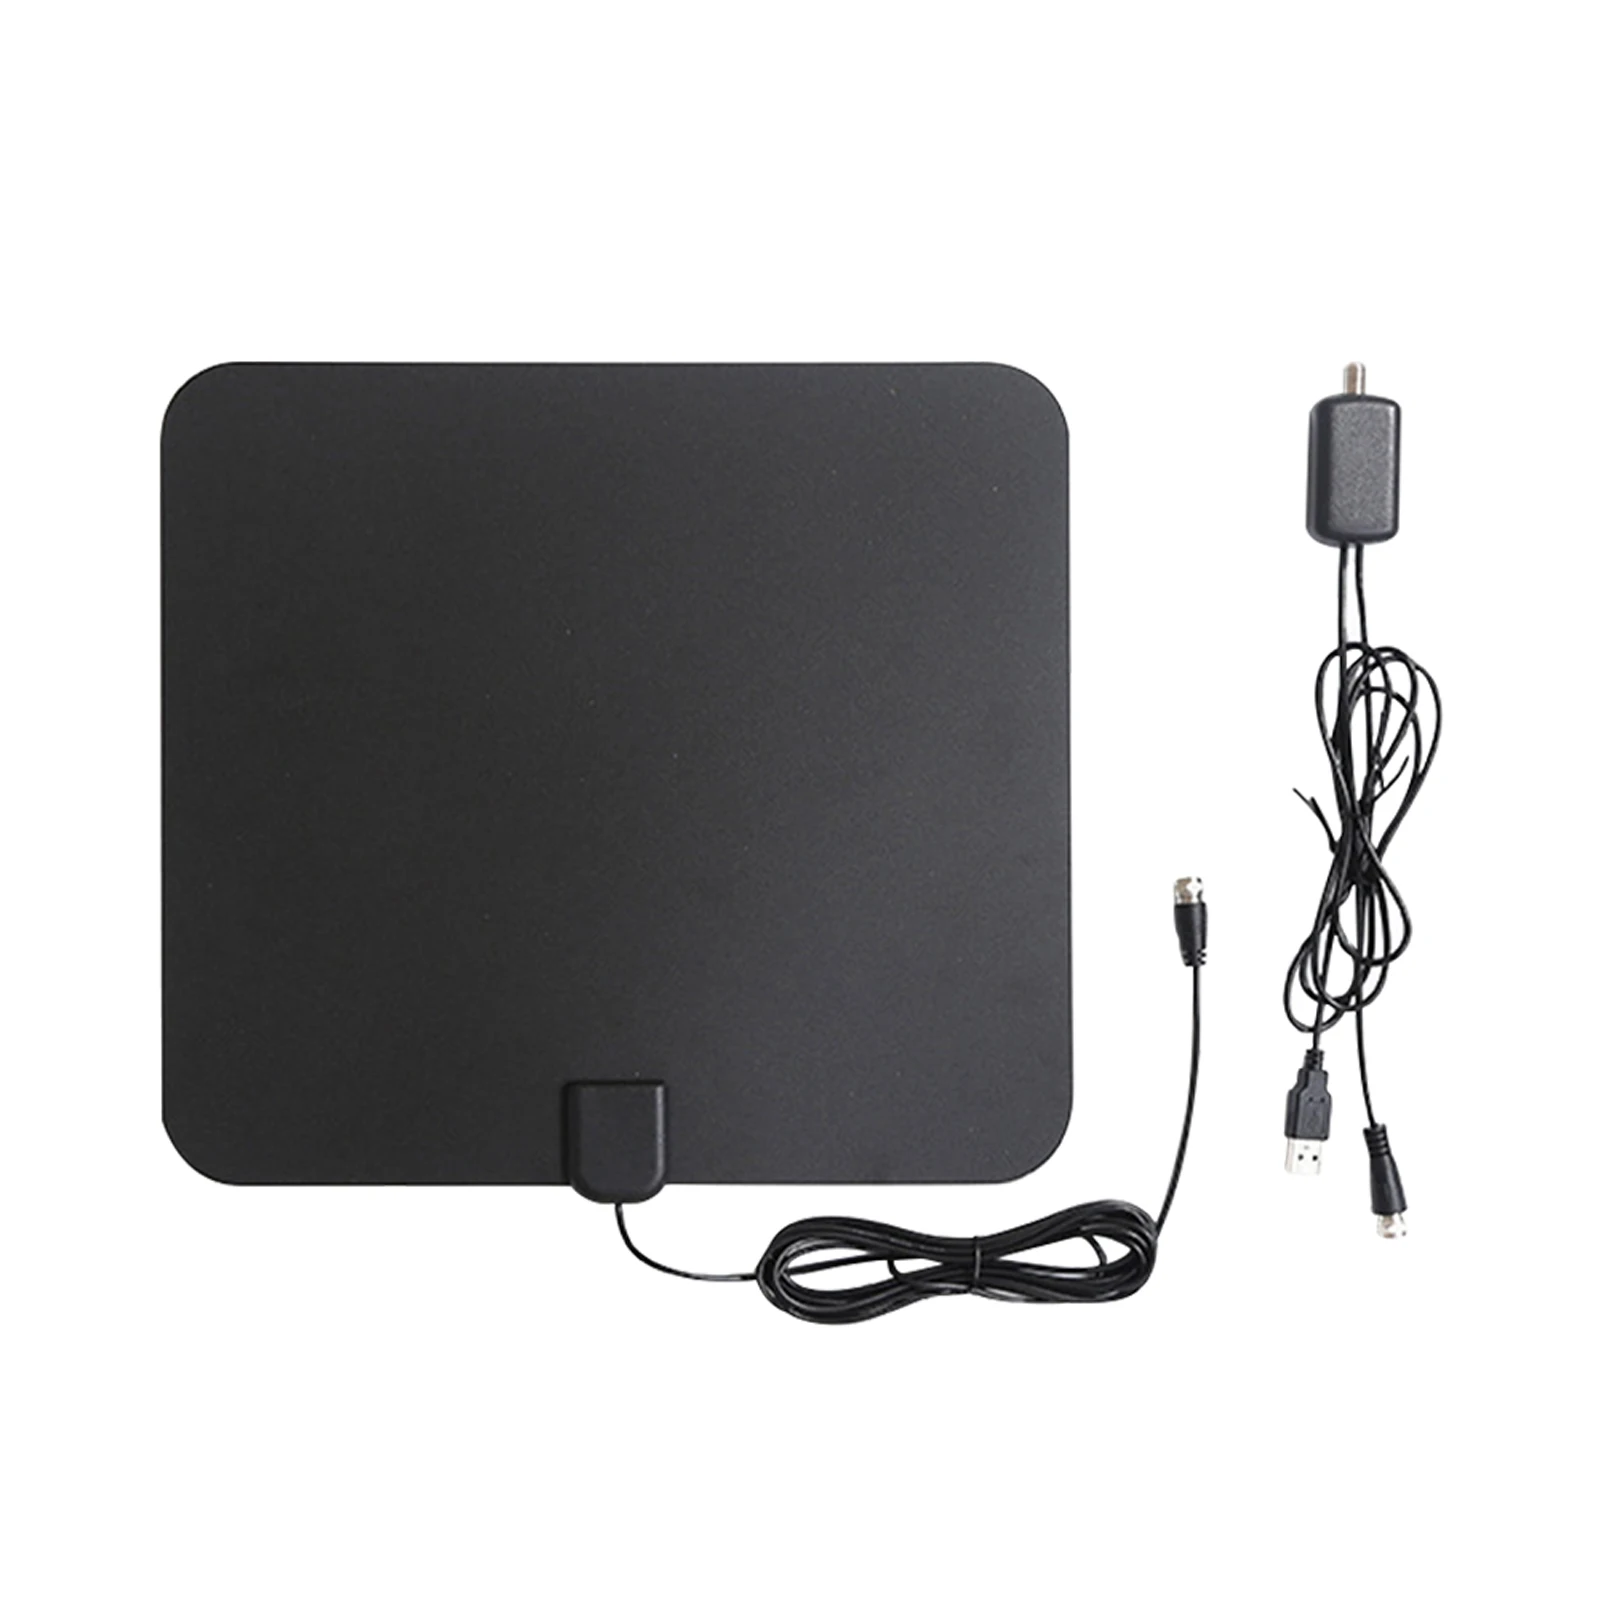 

HD Digital Coax Cable Ground Wave Home TV Antenna Accessories Local Channels Aerial Indoor Dtmb Amplified Long Durable 1080P